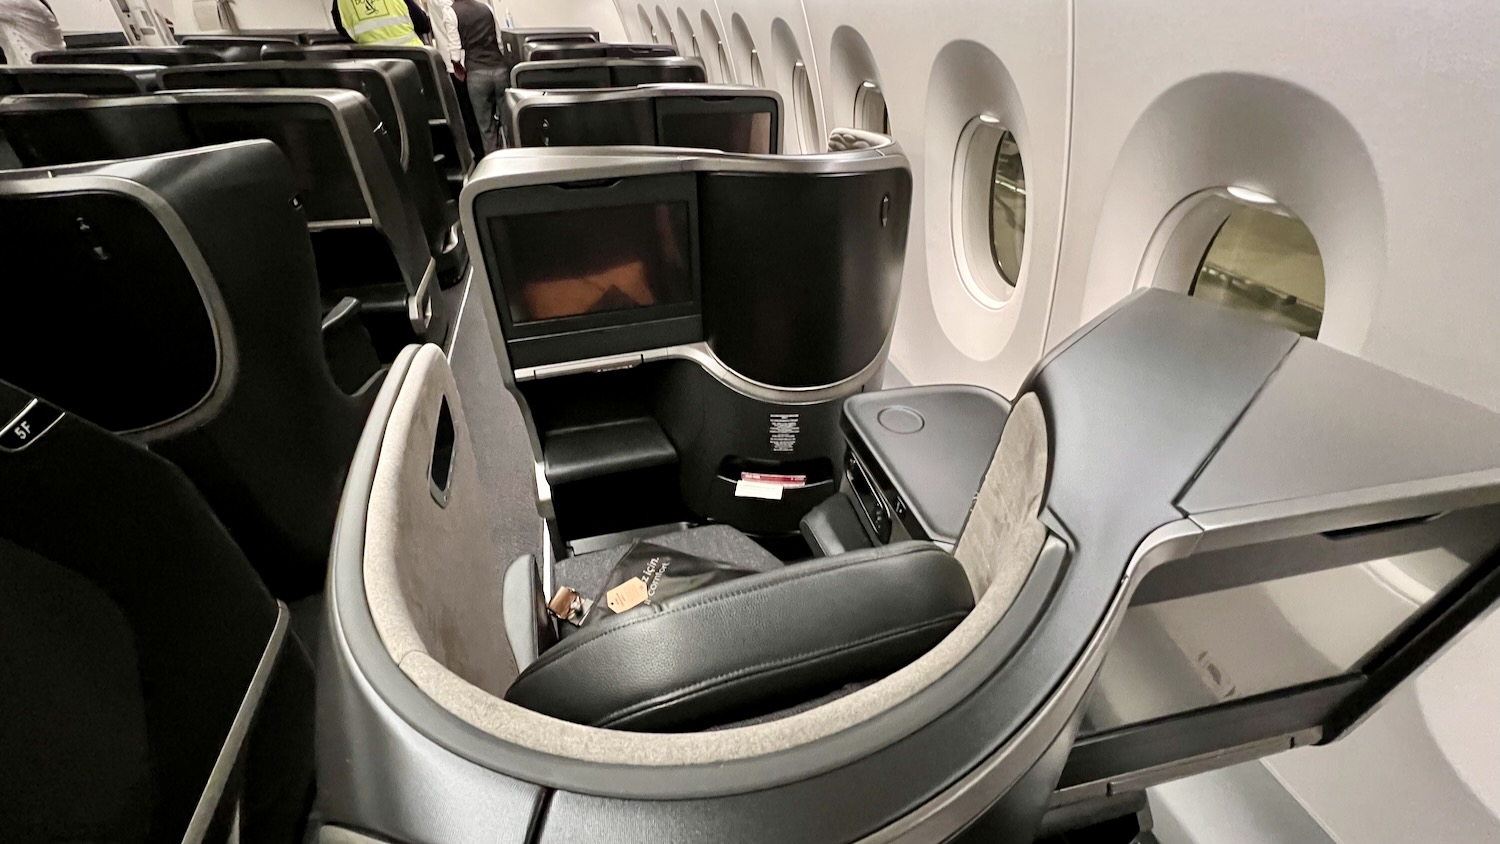 Turkish Airlines Business Class A350 seat